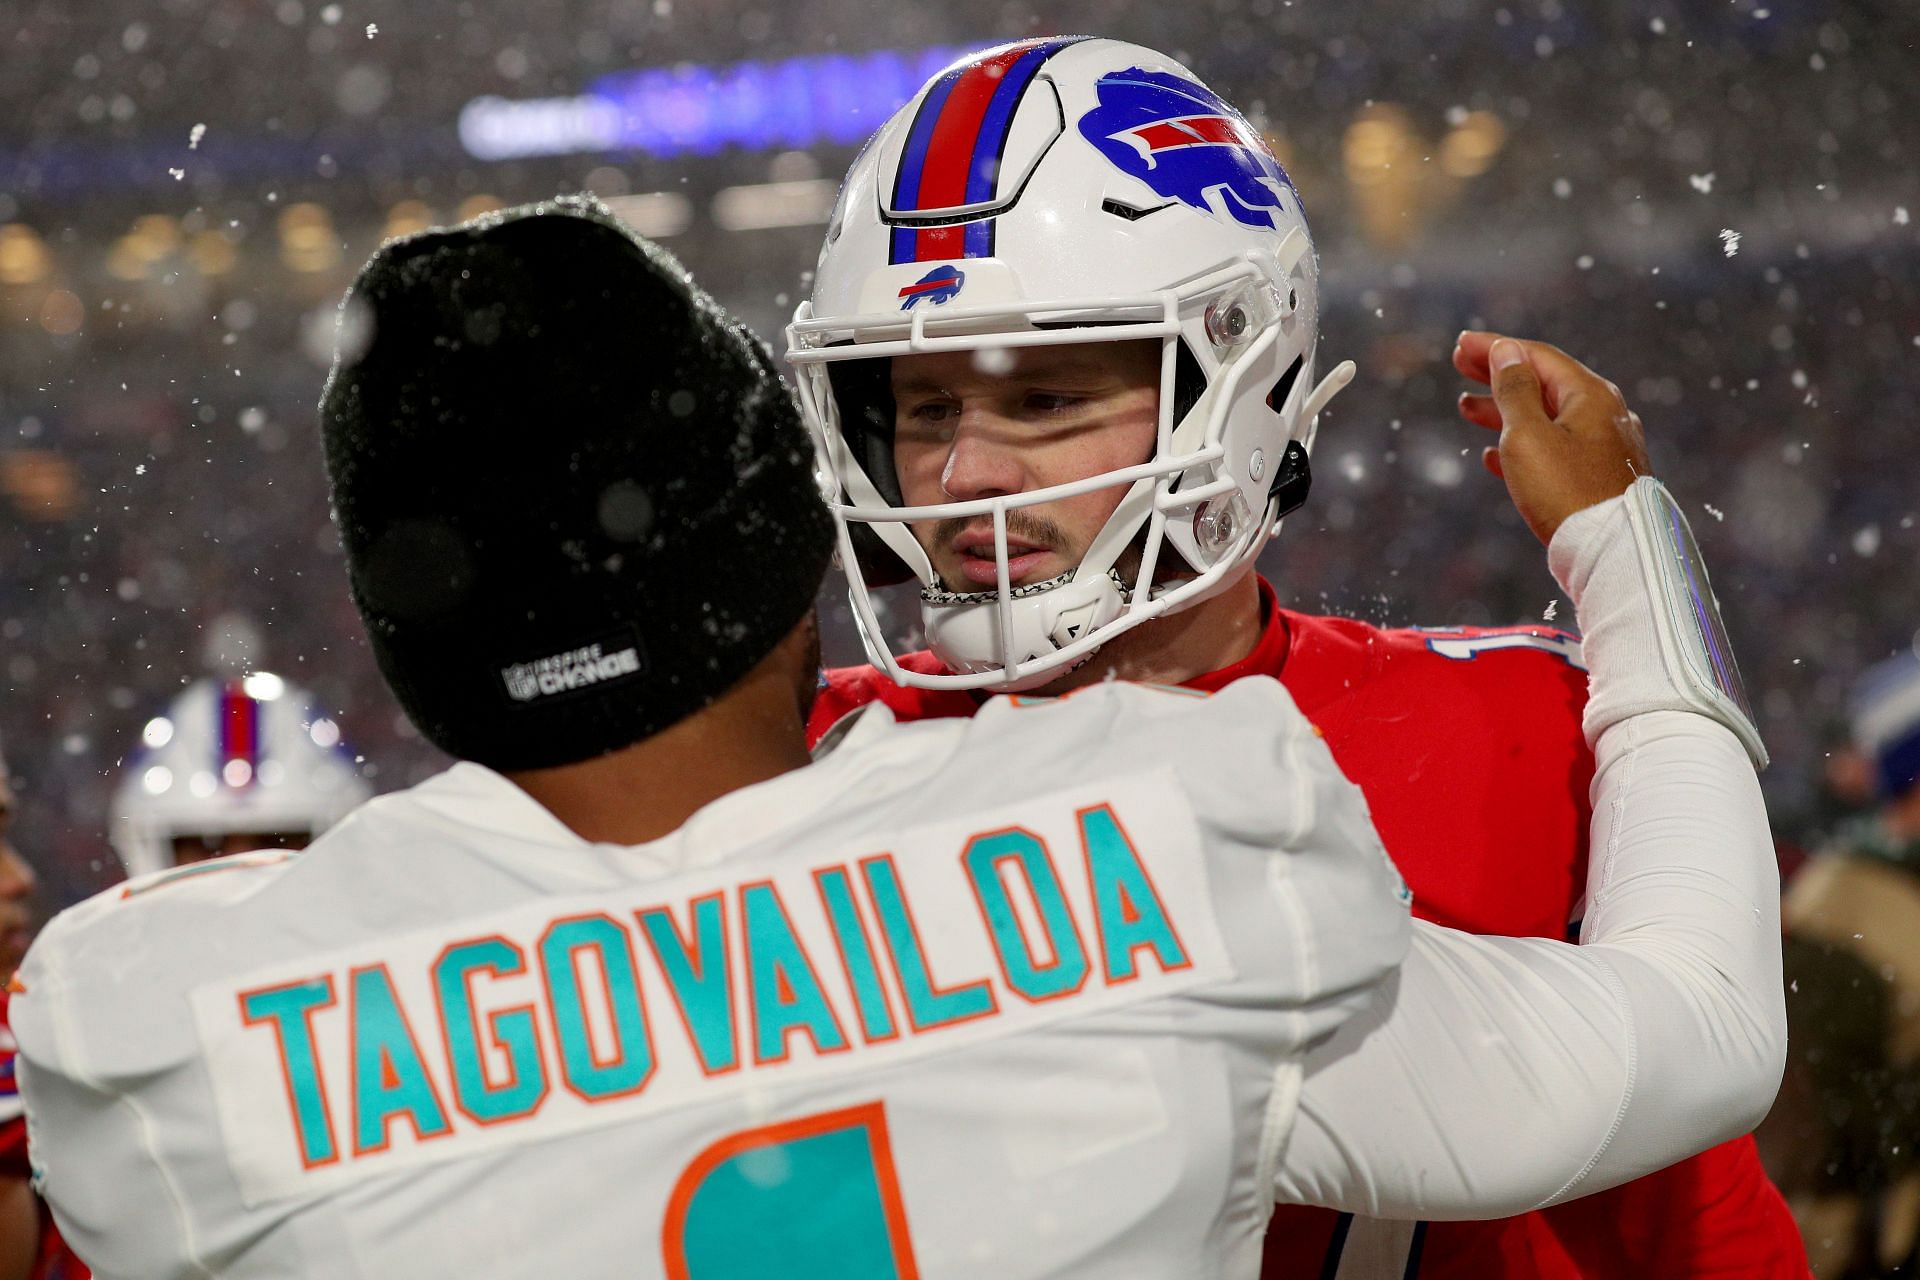 Without Tua Tagovailoa, the Dolphins are huge underdogs